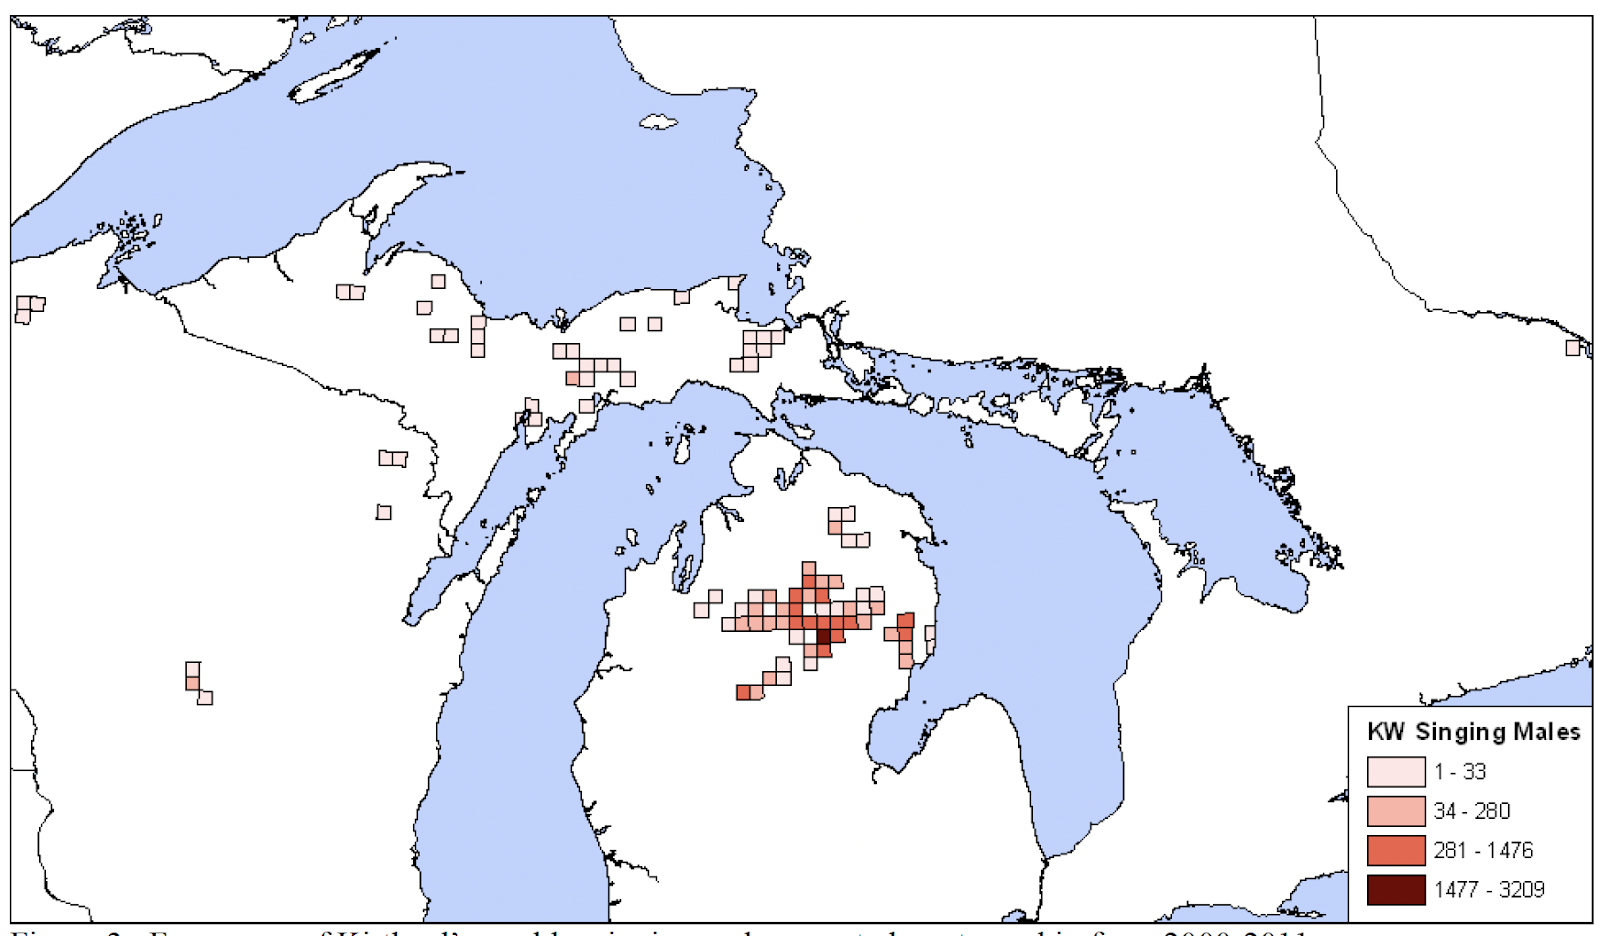 A blank map of Michigan and the surrounding lake regions shows the frequency of singing Kirtland's Warblers, in a heat map that shows 1 to 33, 34 to 280, 281 to 1476, and 1477 to 3209 birds. The highest density of bird are in the lower peninsula of Michigan, with some additional birds in the upper peninsula, Canada, and Wisconsin.